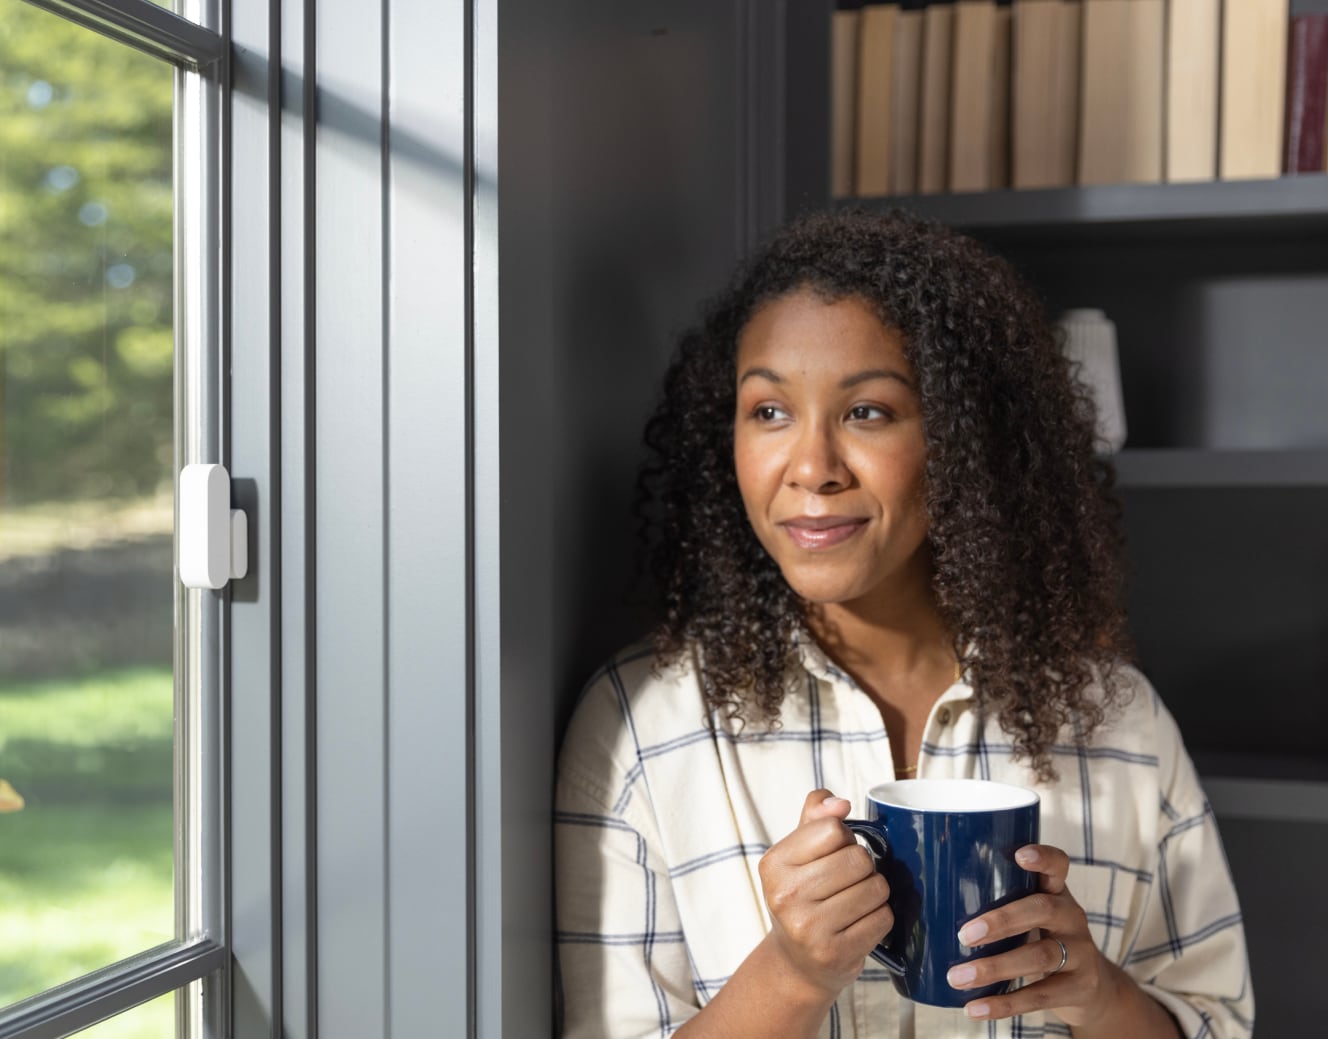 Woman drinking out of a mug and staring out the window with a window sensor